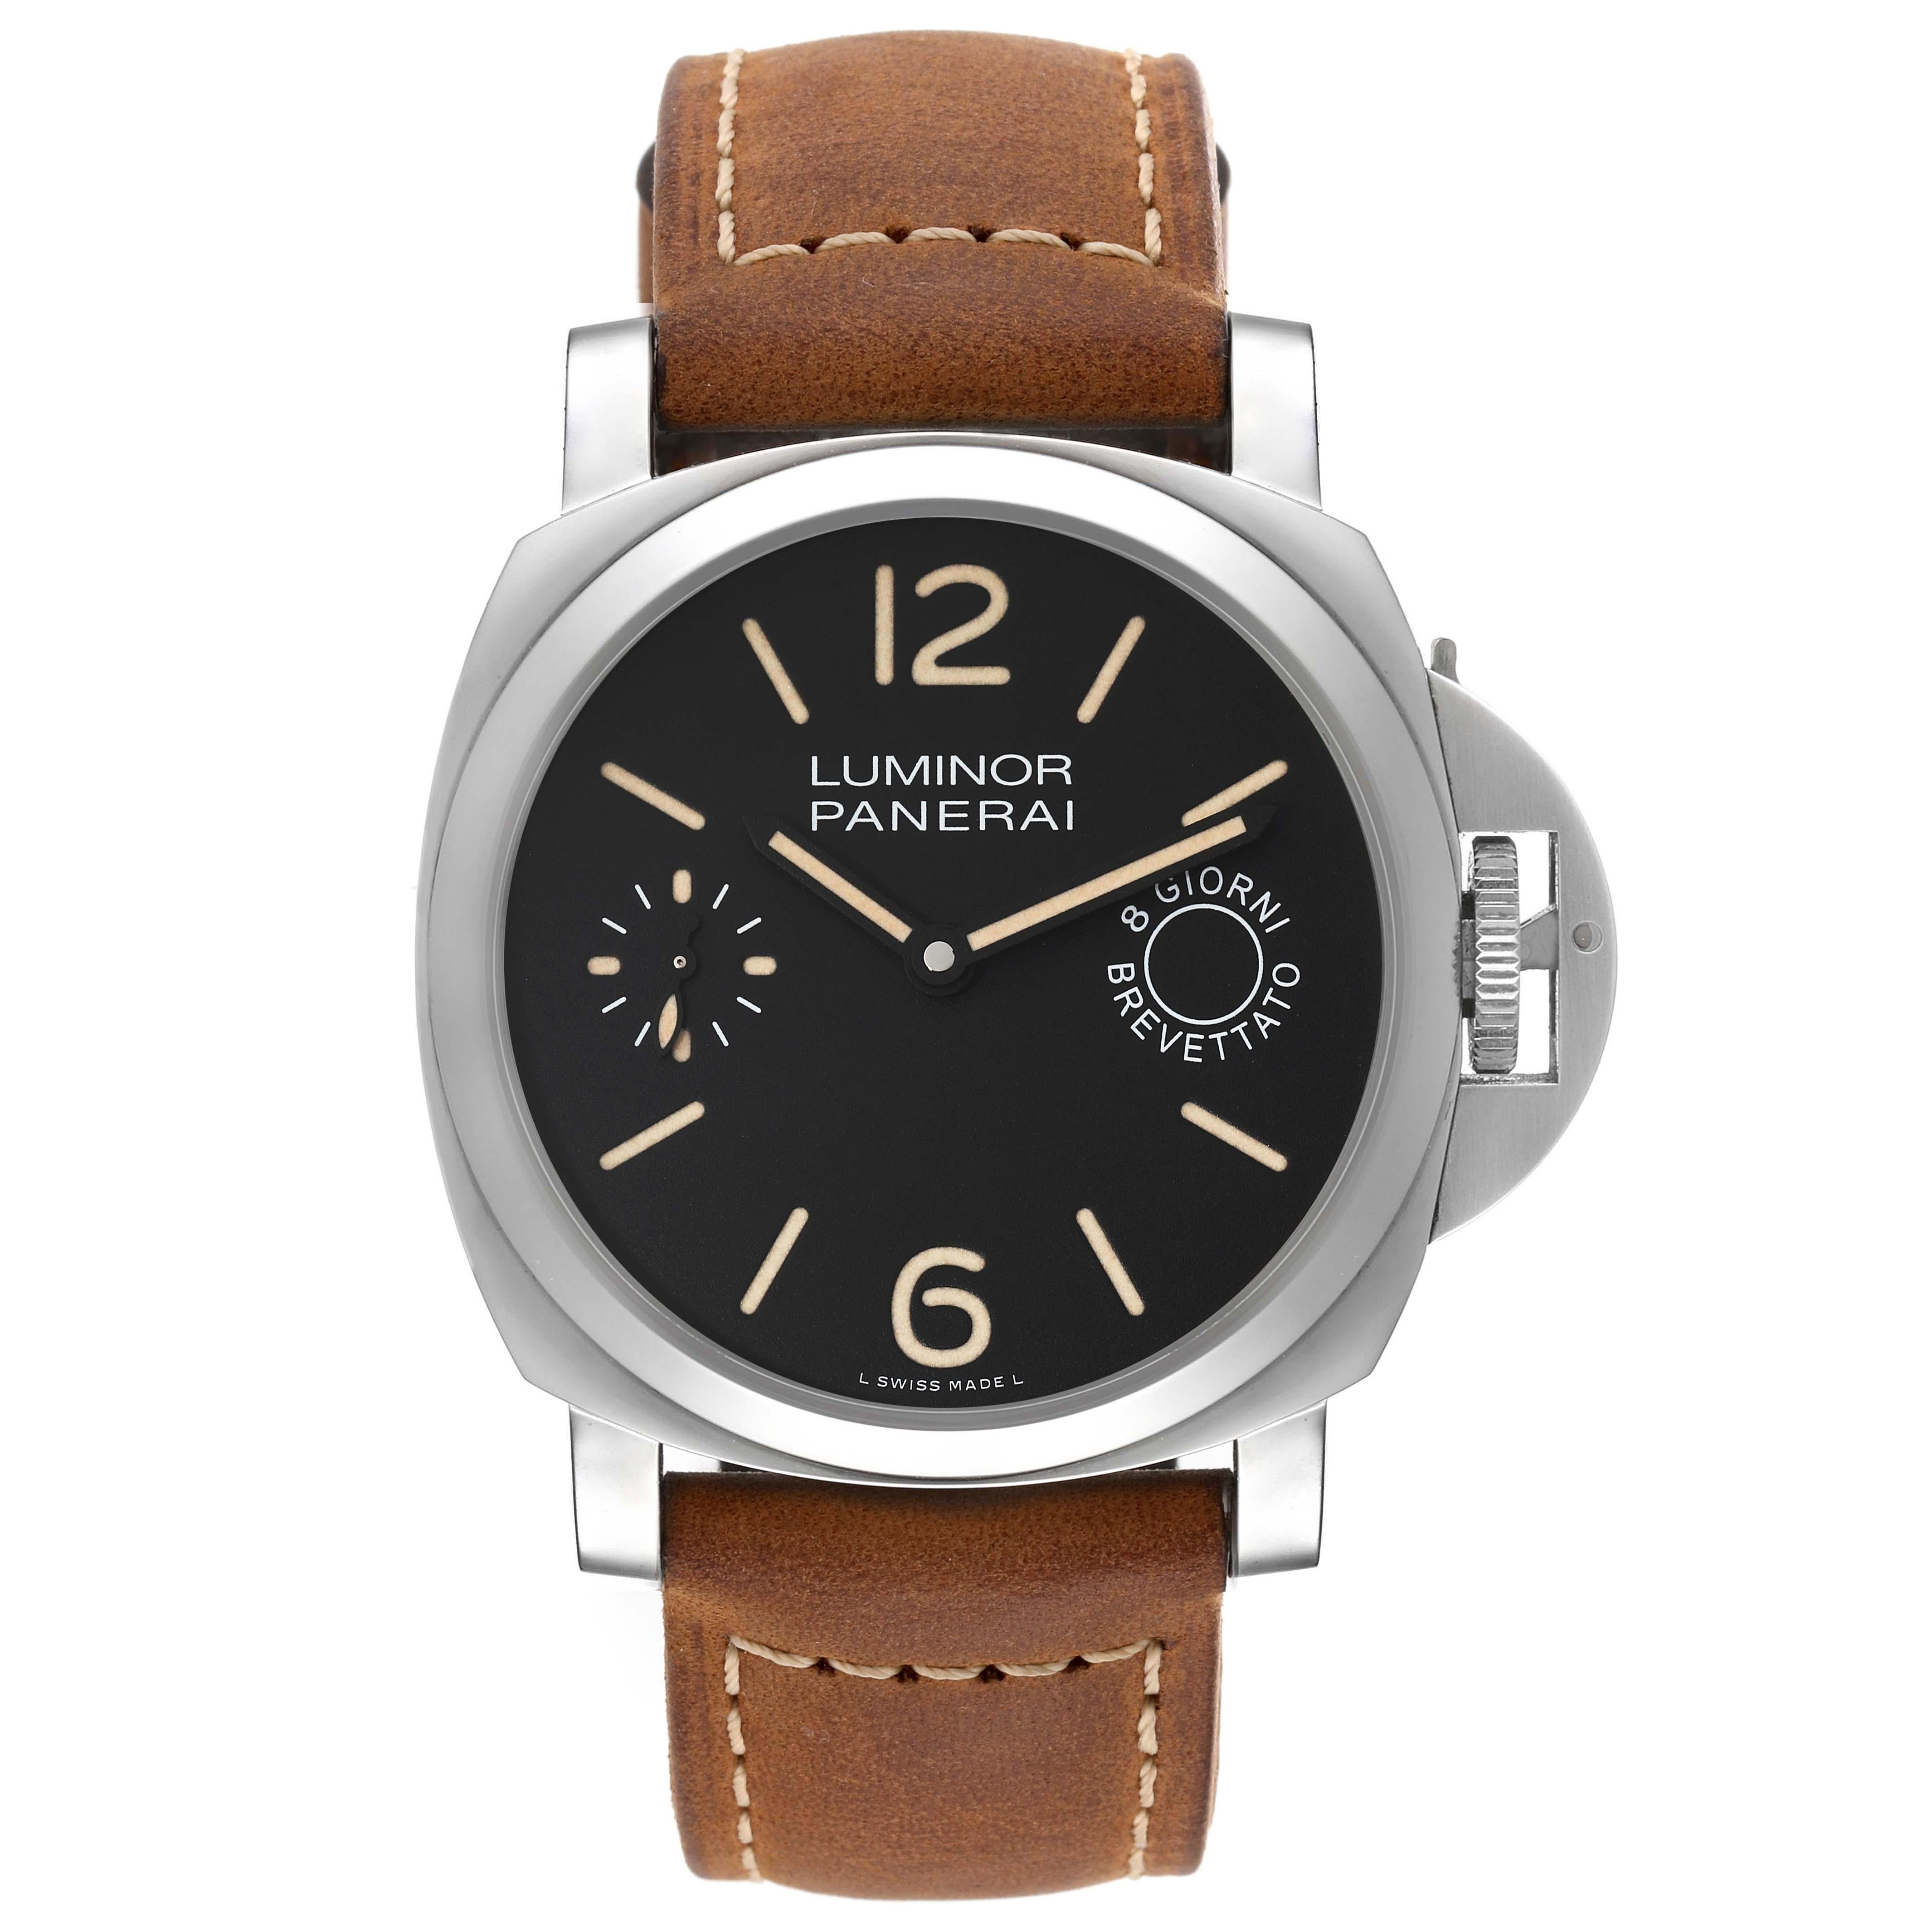 Panerai Luminor Marina 8 Days Limited Edition Steel Mens Watch PAM00590 Box Card. Automatic self-winding movement. Two part cushion shaped stainless steel case 44.0 mm in diameter. Panerai patented crown protector. Polished stainless steel sloped